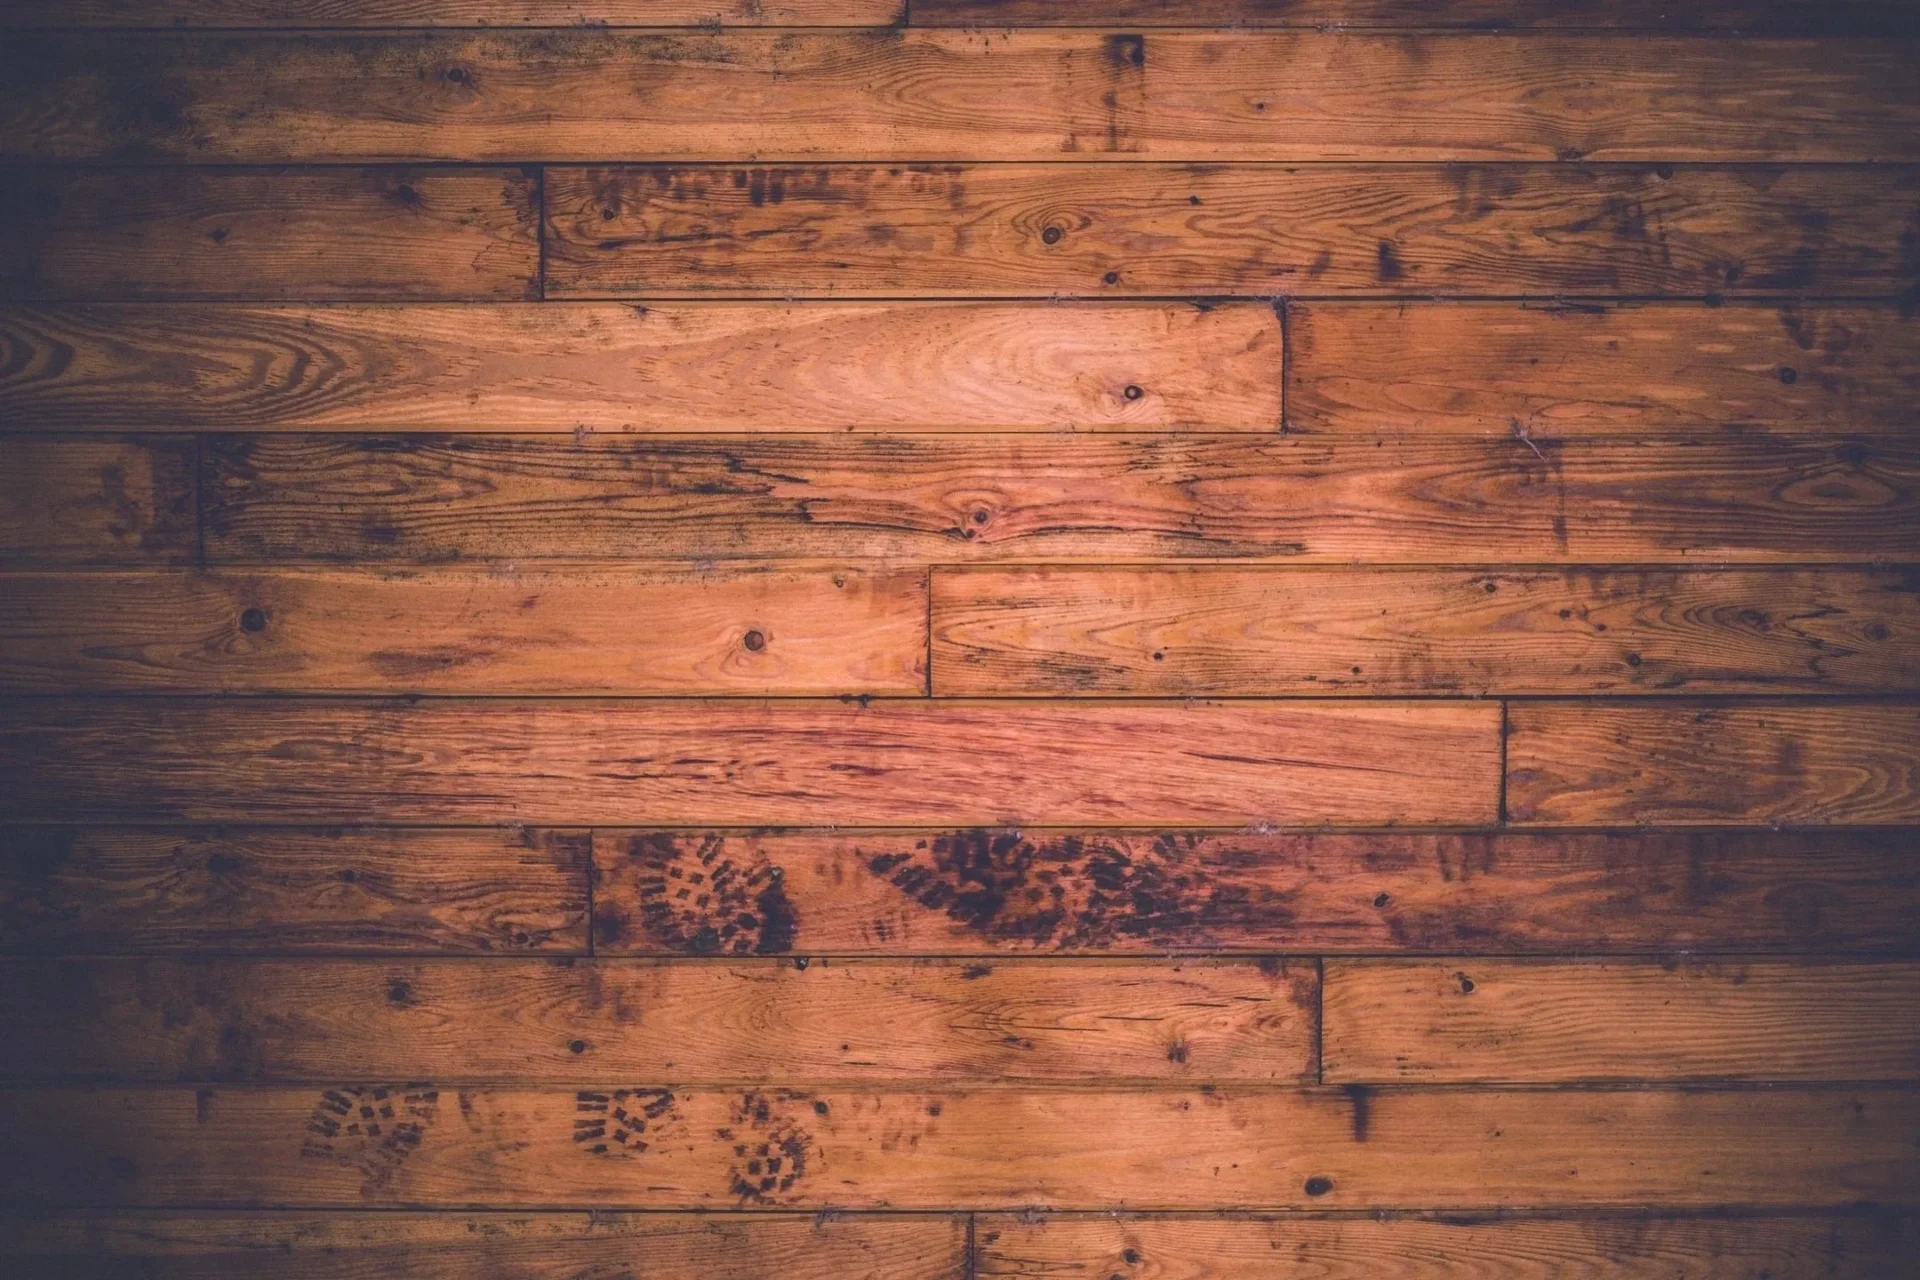 A wooden floor with some brown wood planks